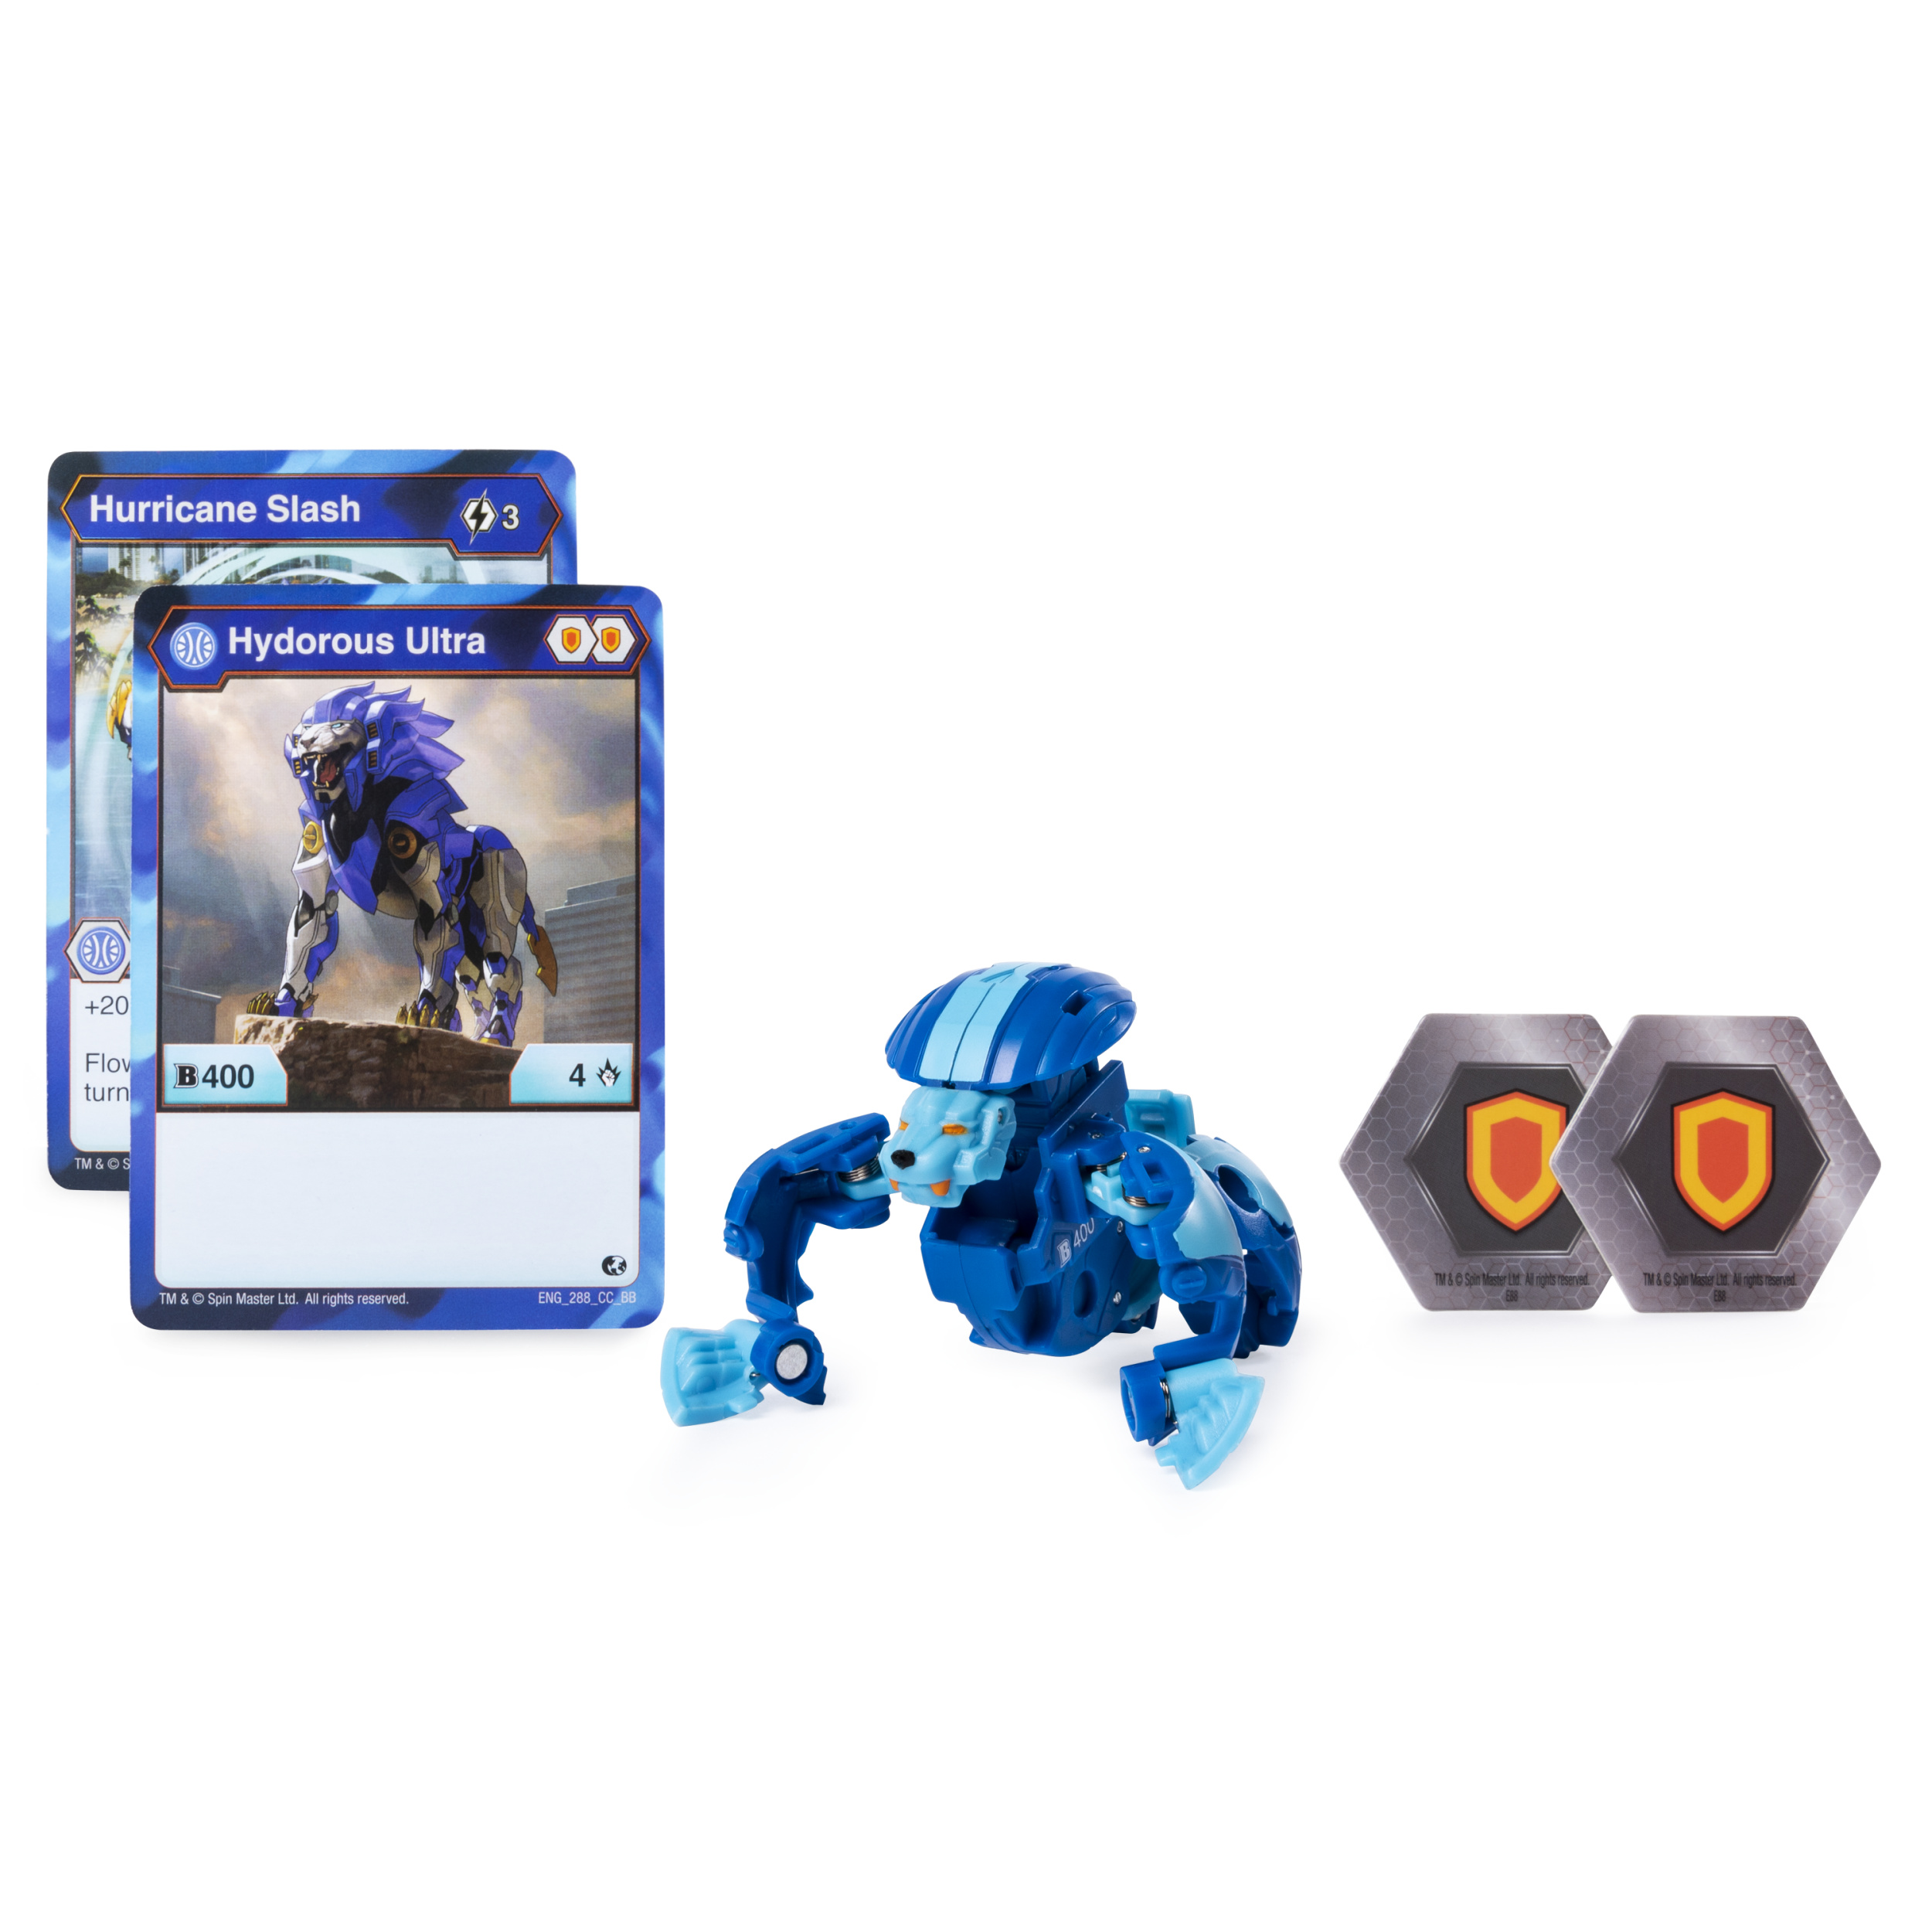 Bakugan Ultra, Hydorous, 3-inch Collectible Action Figure and Trading Card, for Ages 6 and up - image 2 of 5